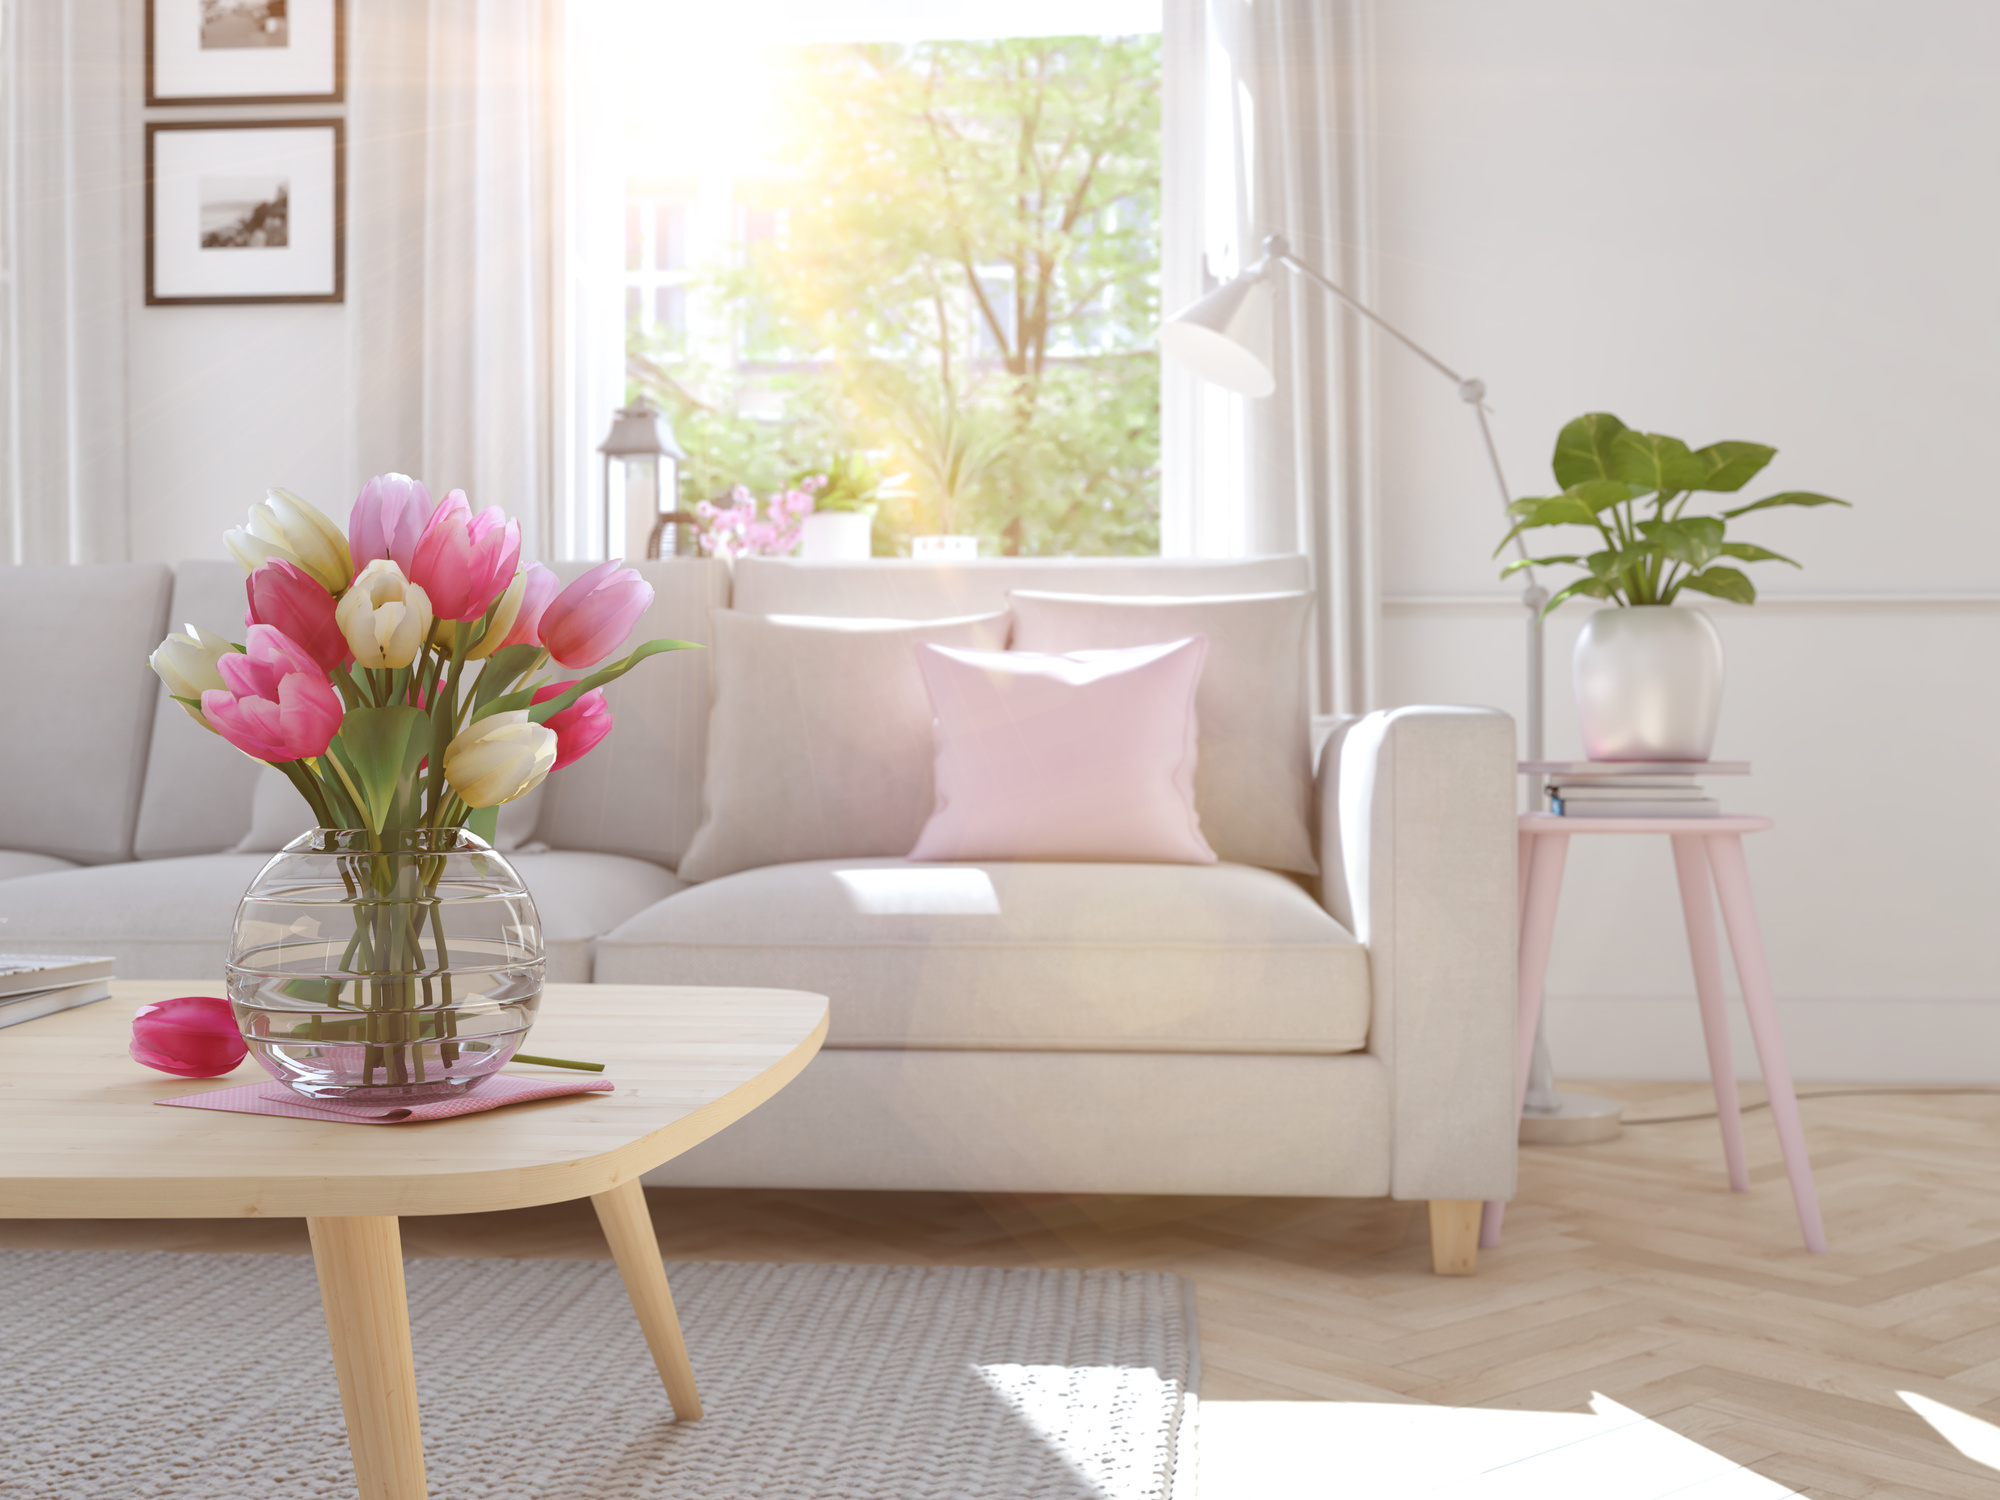 8 Simple  Decorating  Tips  to Beautify Your Home  Sparkle 